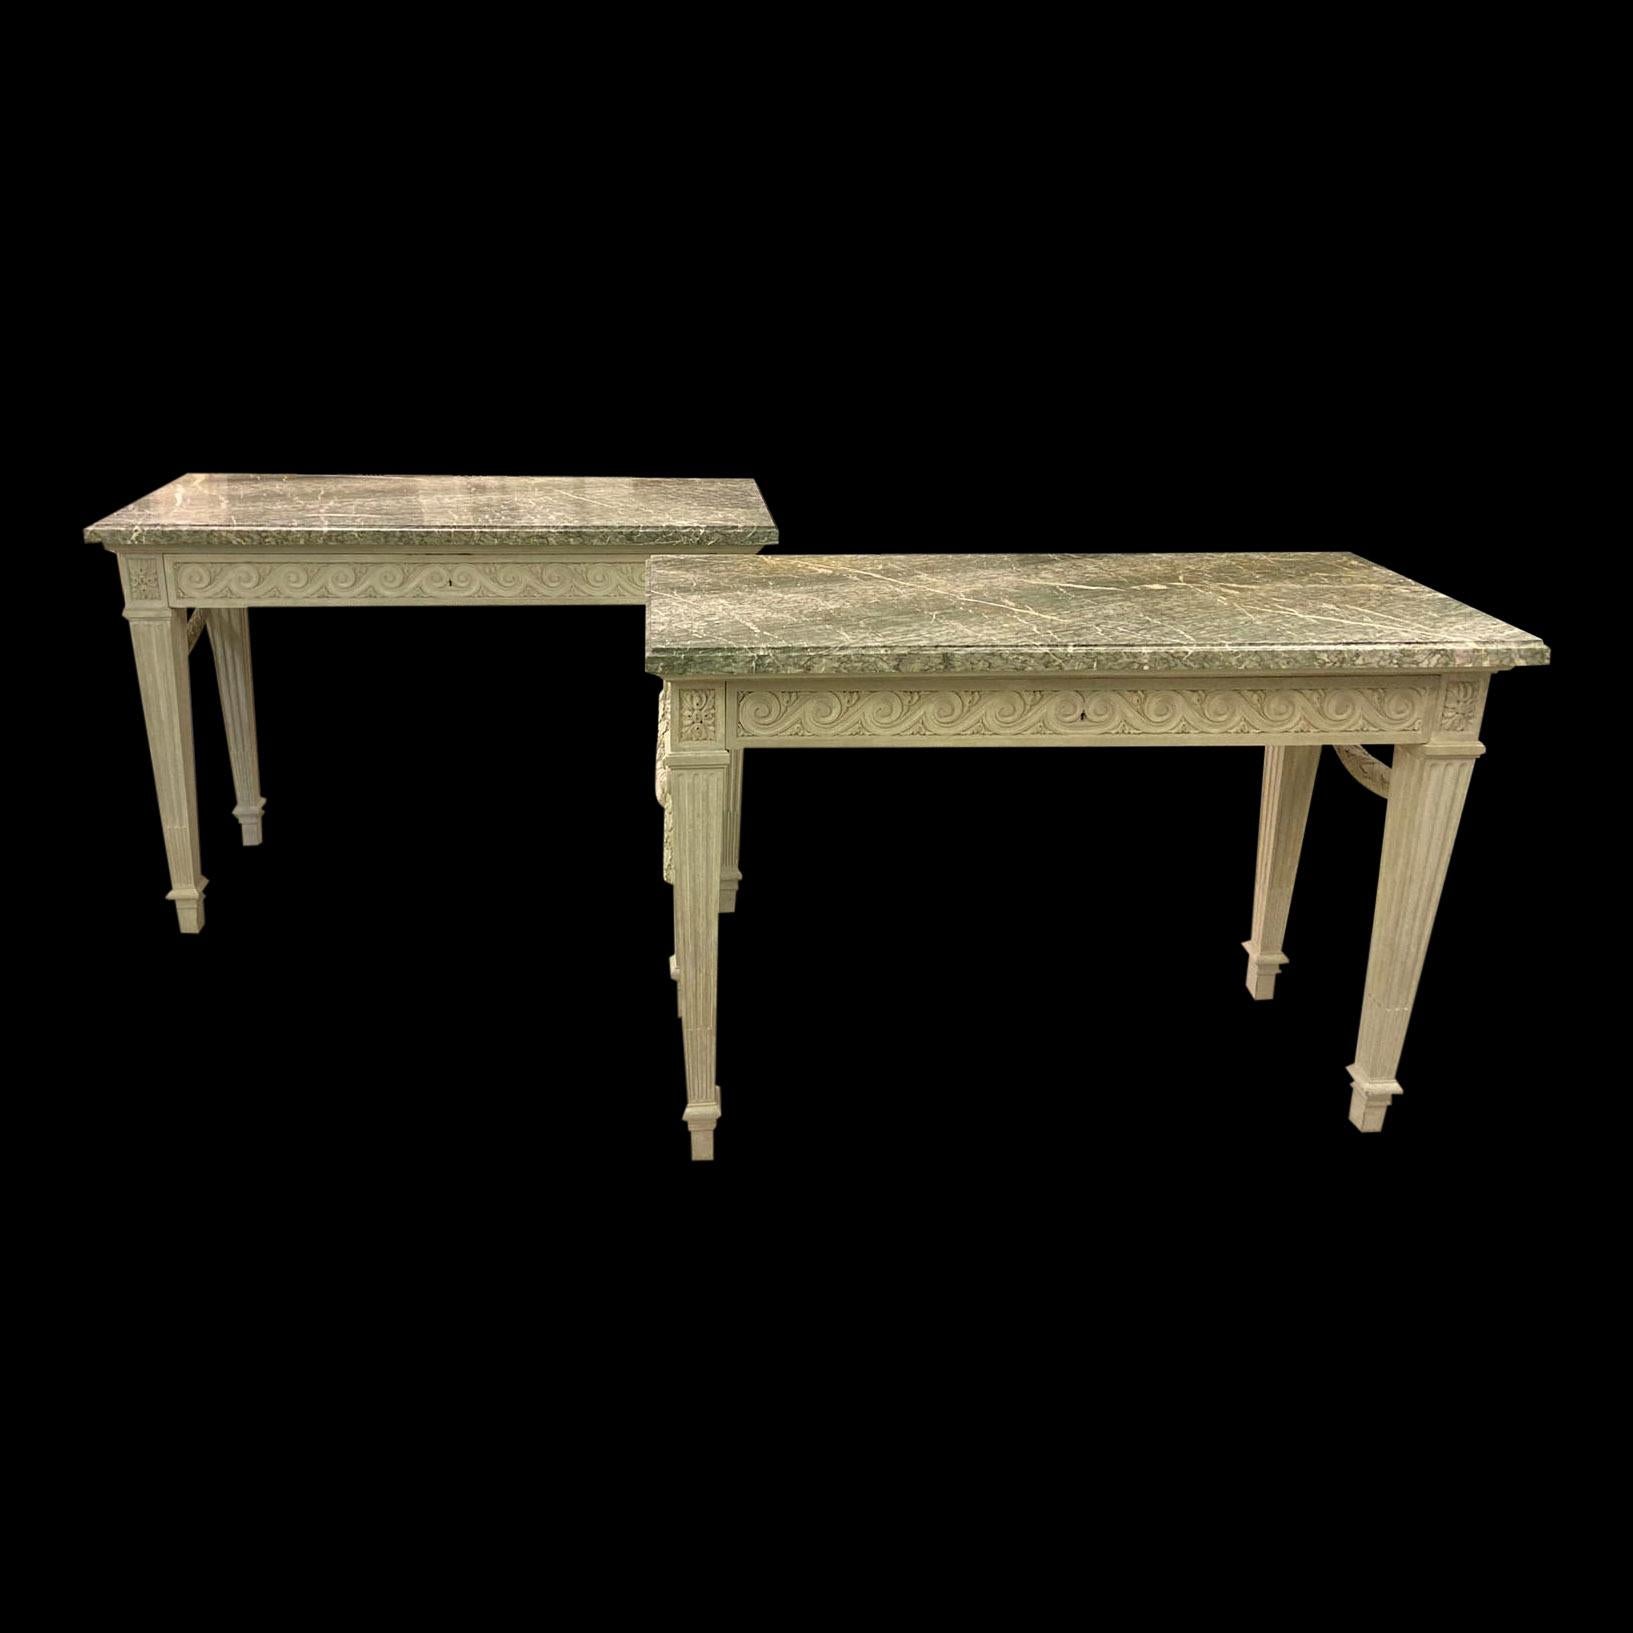 A pair of late 19th century painted wooden console tables with Cipillino Marble tops. The skirts have Vitruvian scroll decoration with Paterae corner blocks, whilst each end has a ribbon tied laurel-leaf swag draped through rings. The tapering